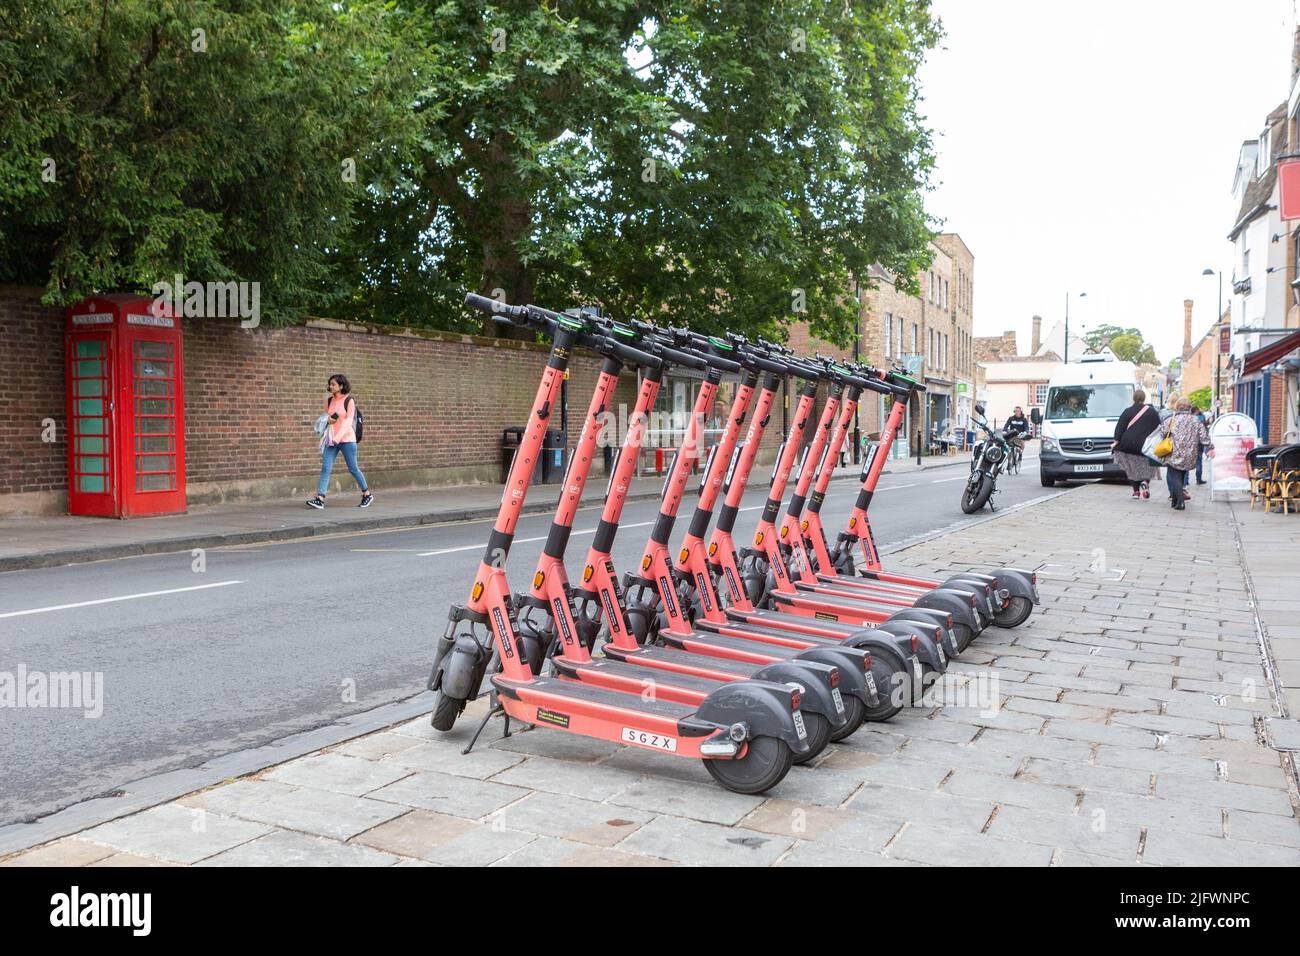 Electric scooters packed in a row on a pavement in Cambridge, UK.   Image shot on 29th June 2022.  © Belinda Jiao   jiao.bilin@gmail.com 07598931257 h Stock Photo